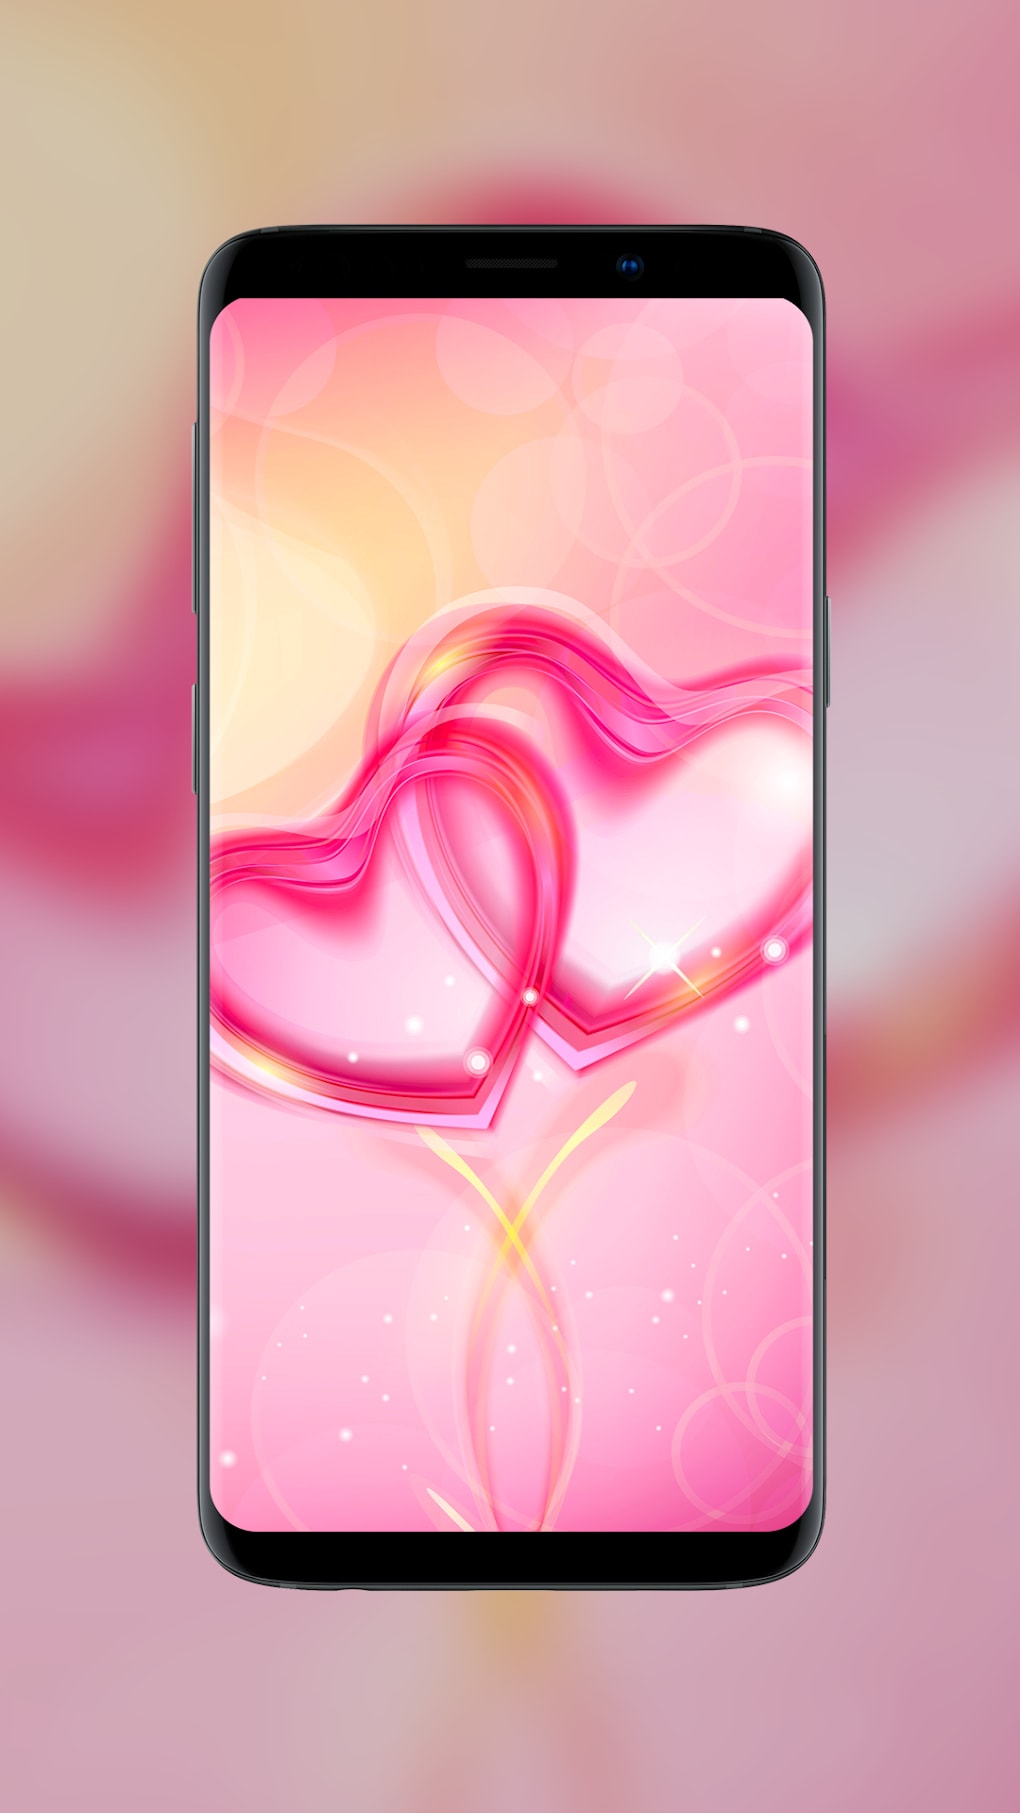 Girly Wallpapers for Girls для Android — Скачать